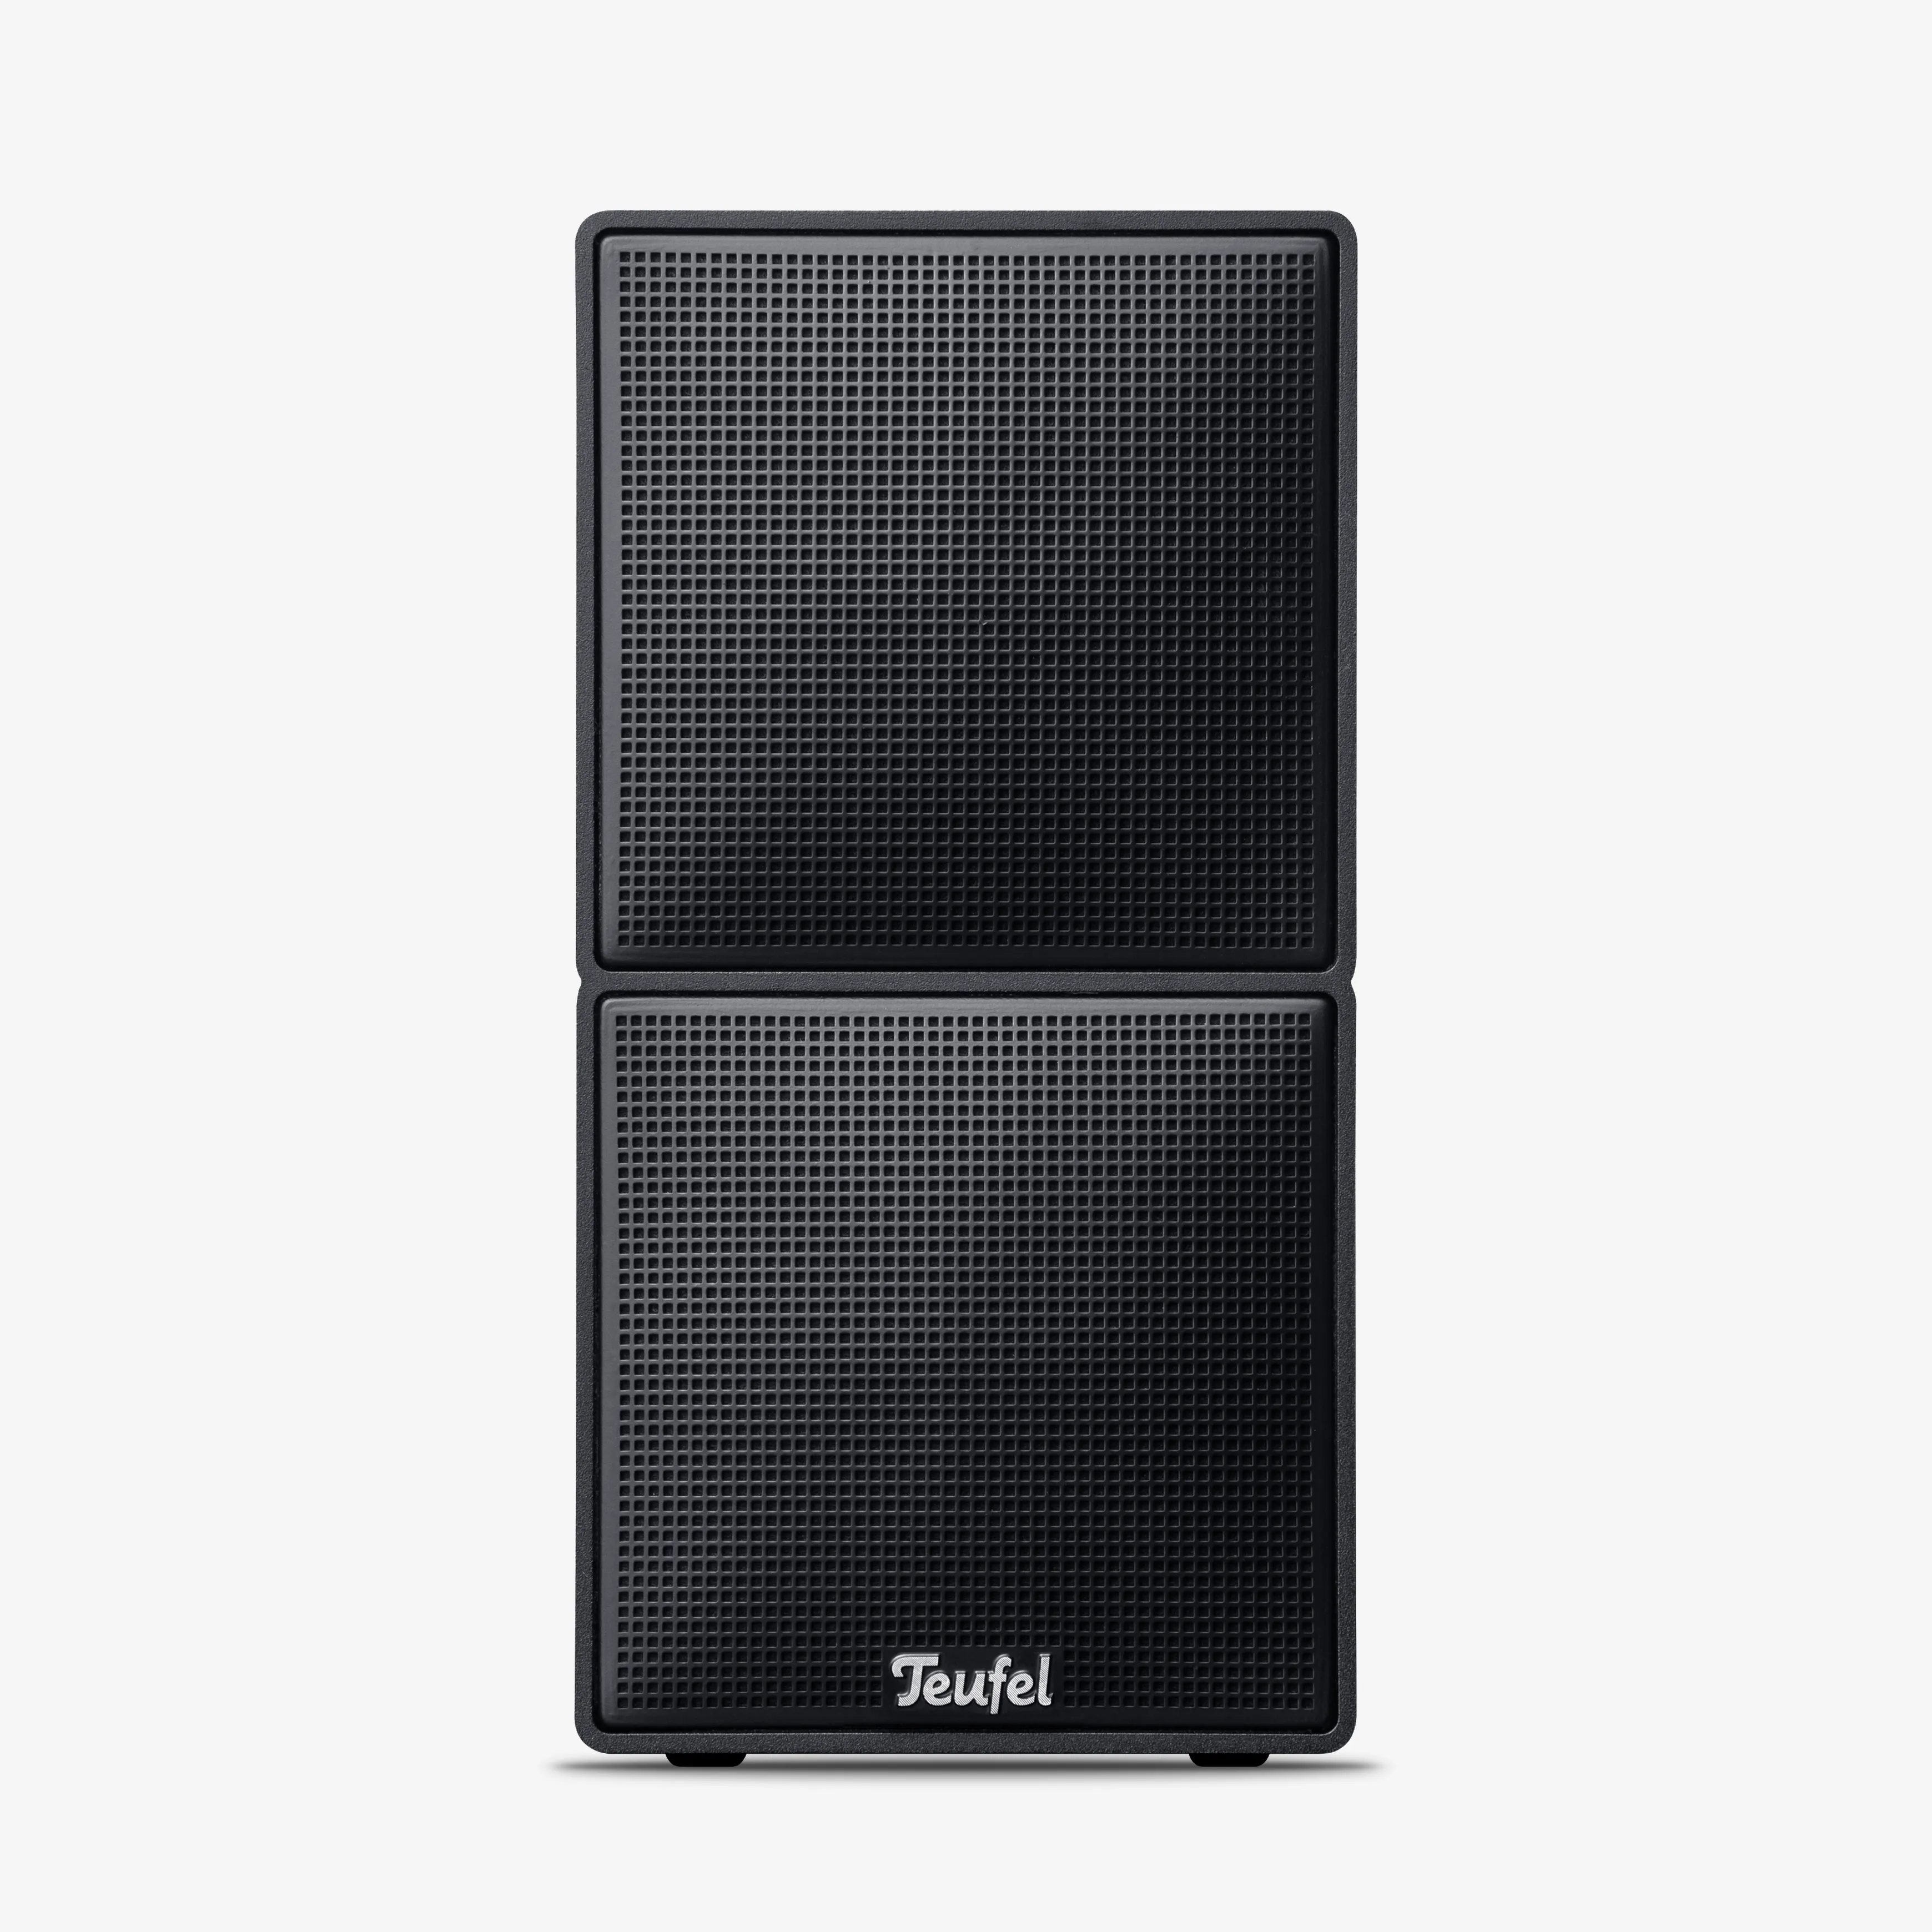 A frontal view of a black Teufel speaker